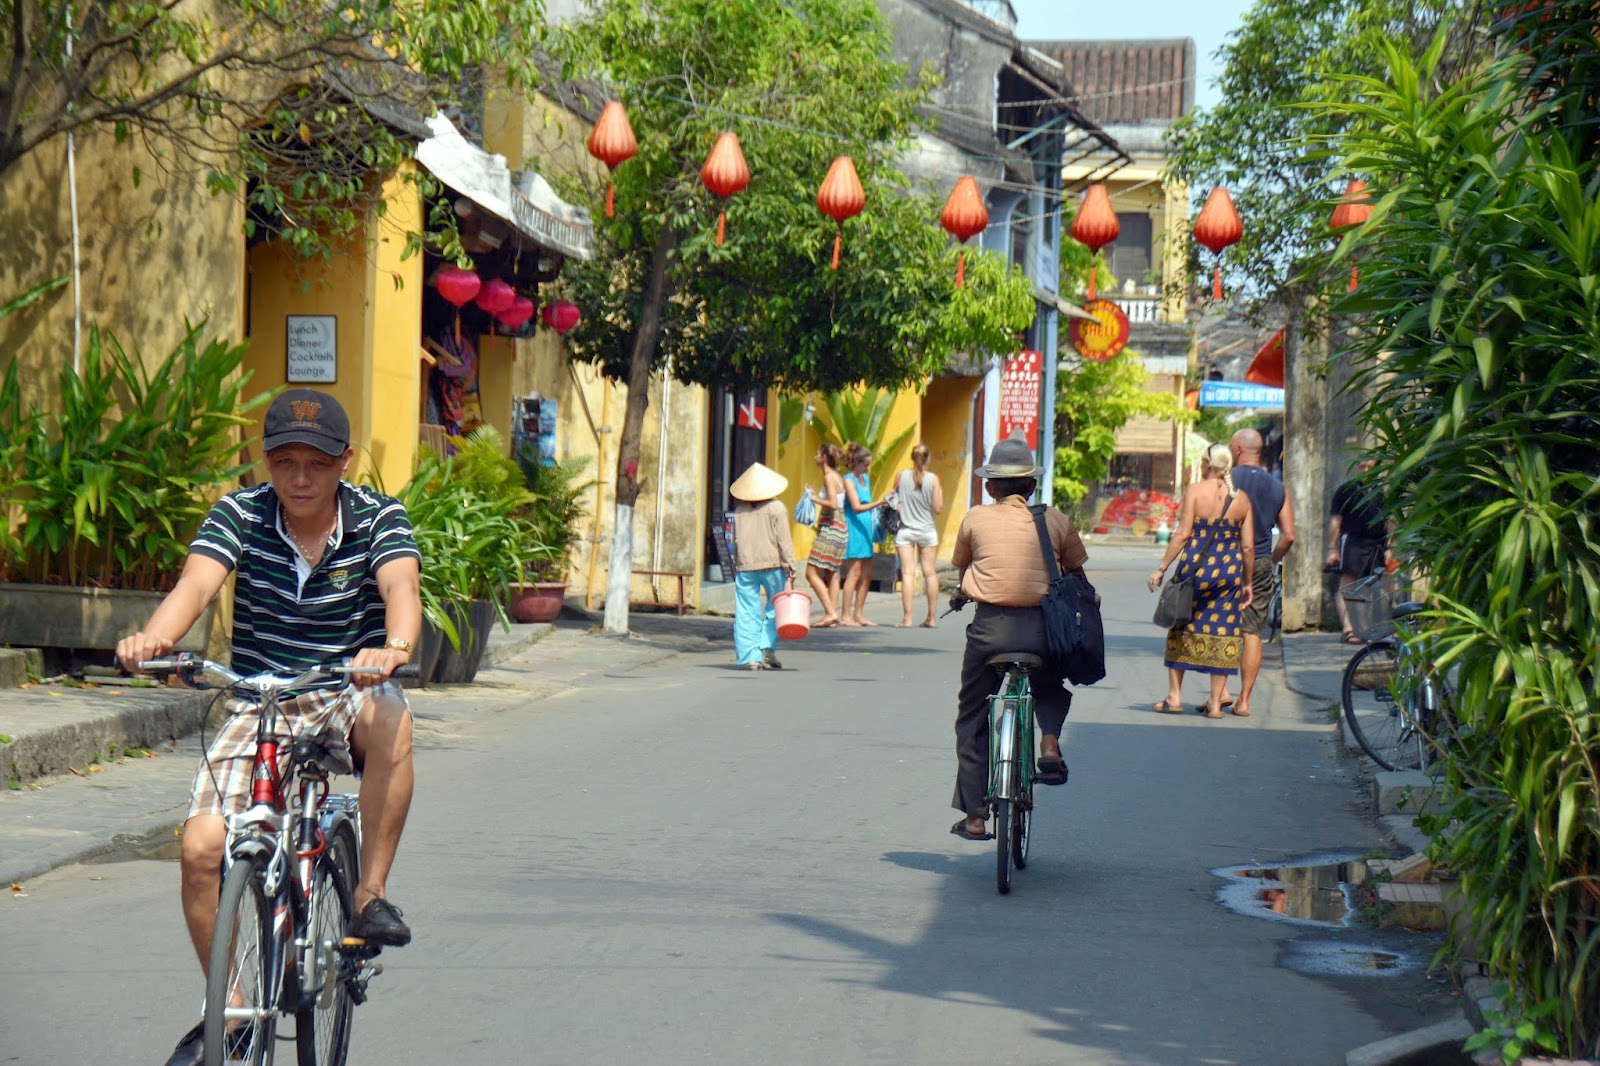 Hoi An’s weather in November